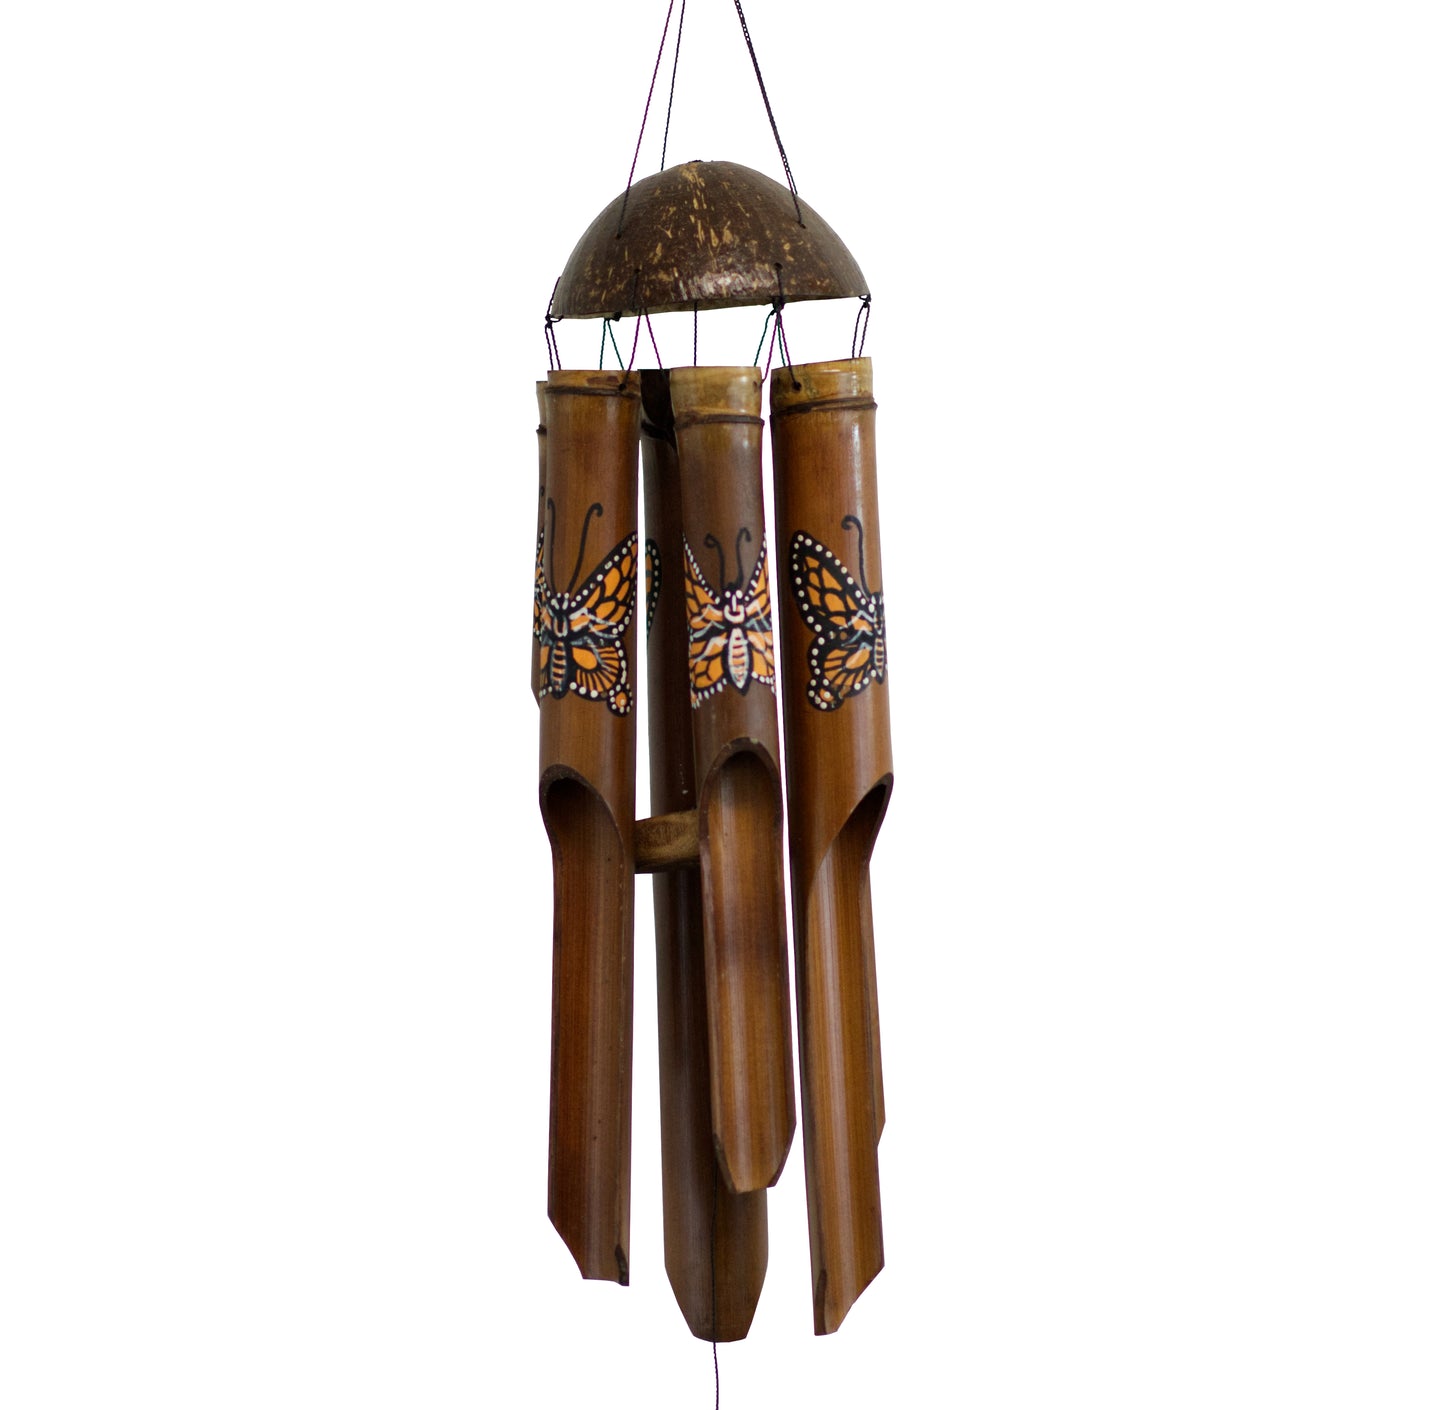 Simple Bamboo Wind Chime - Monarch Butterfly Print